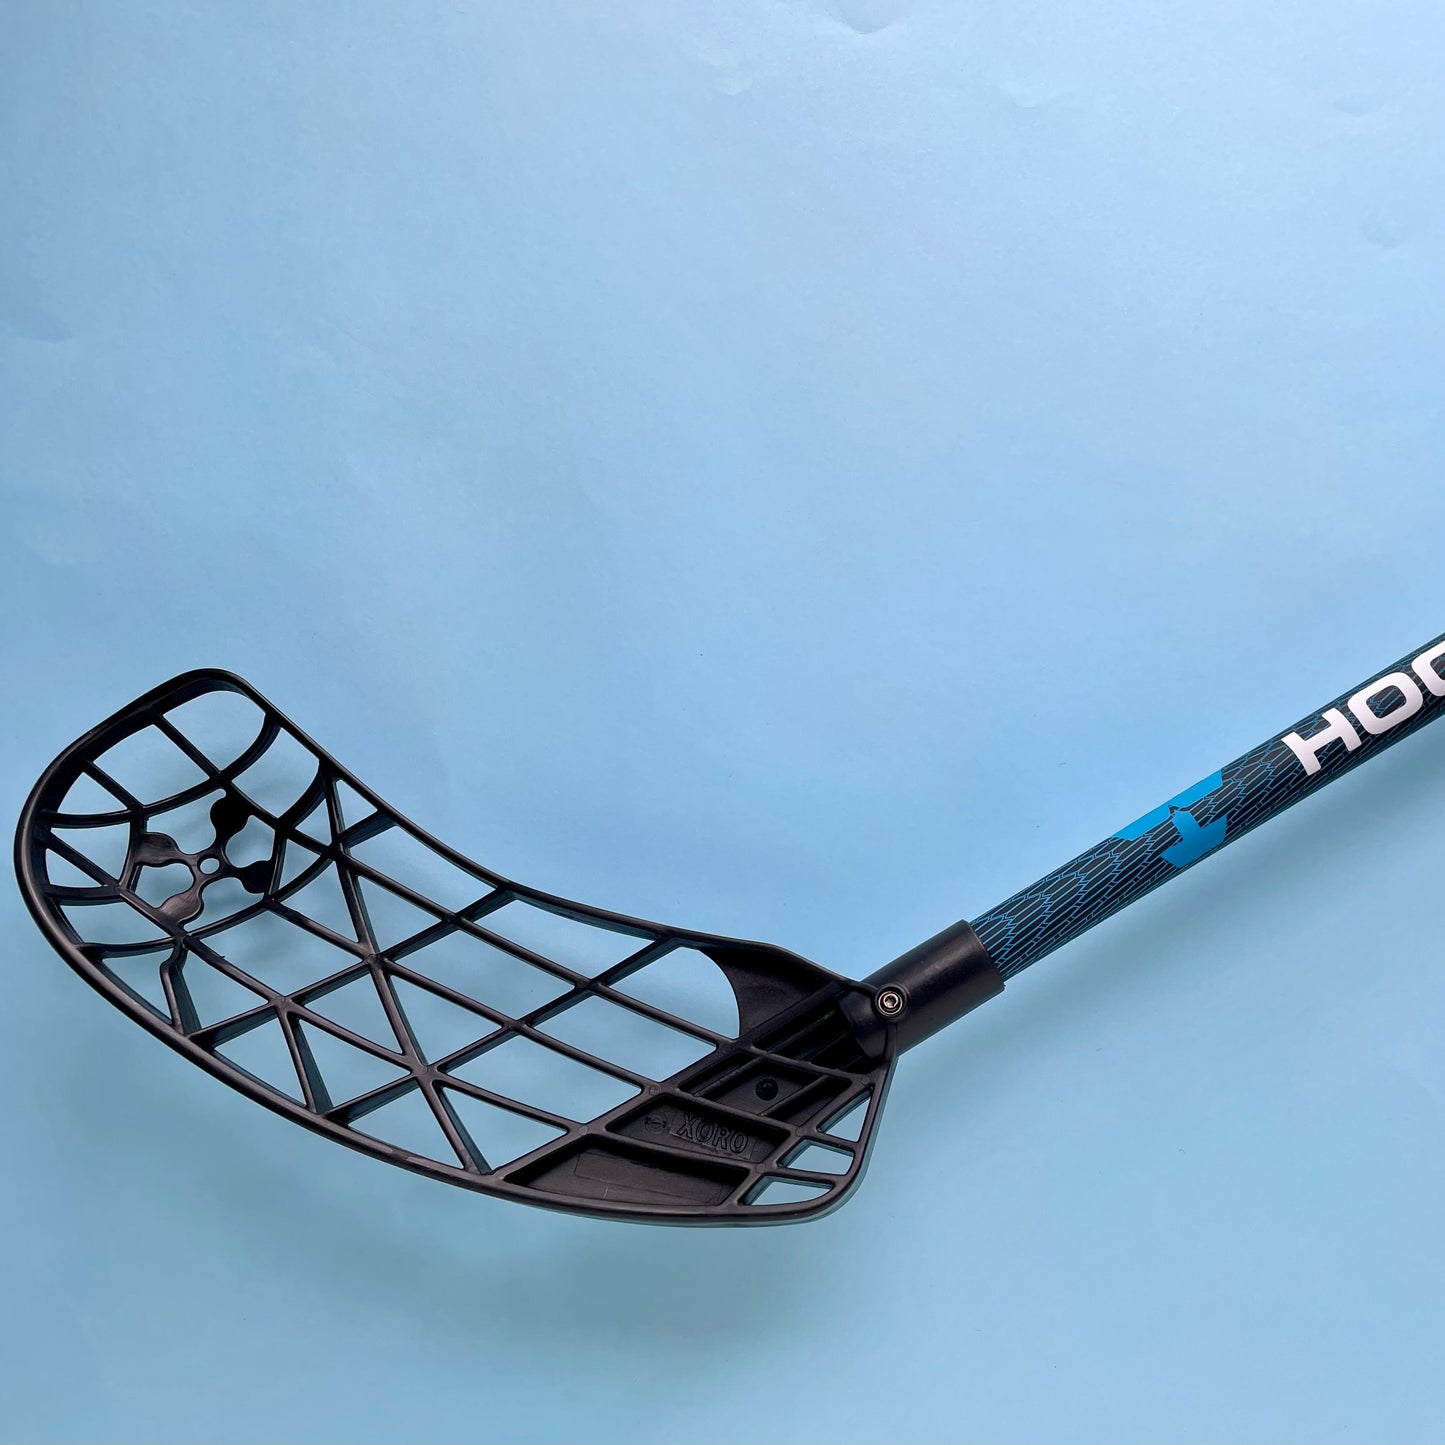 Hockeyball kinetic-shaft blue stick topdown view